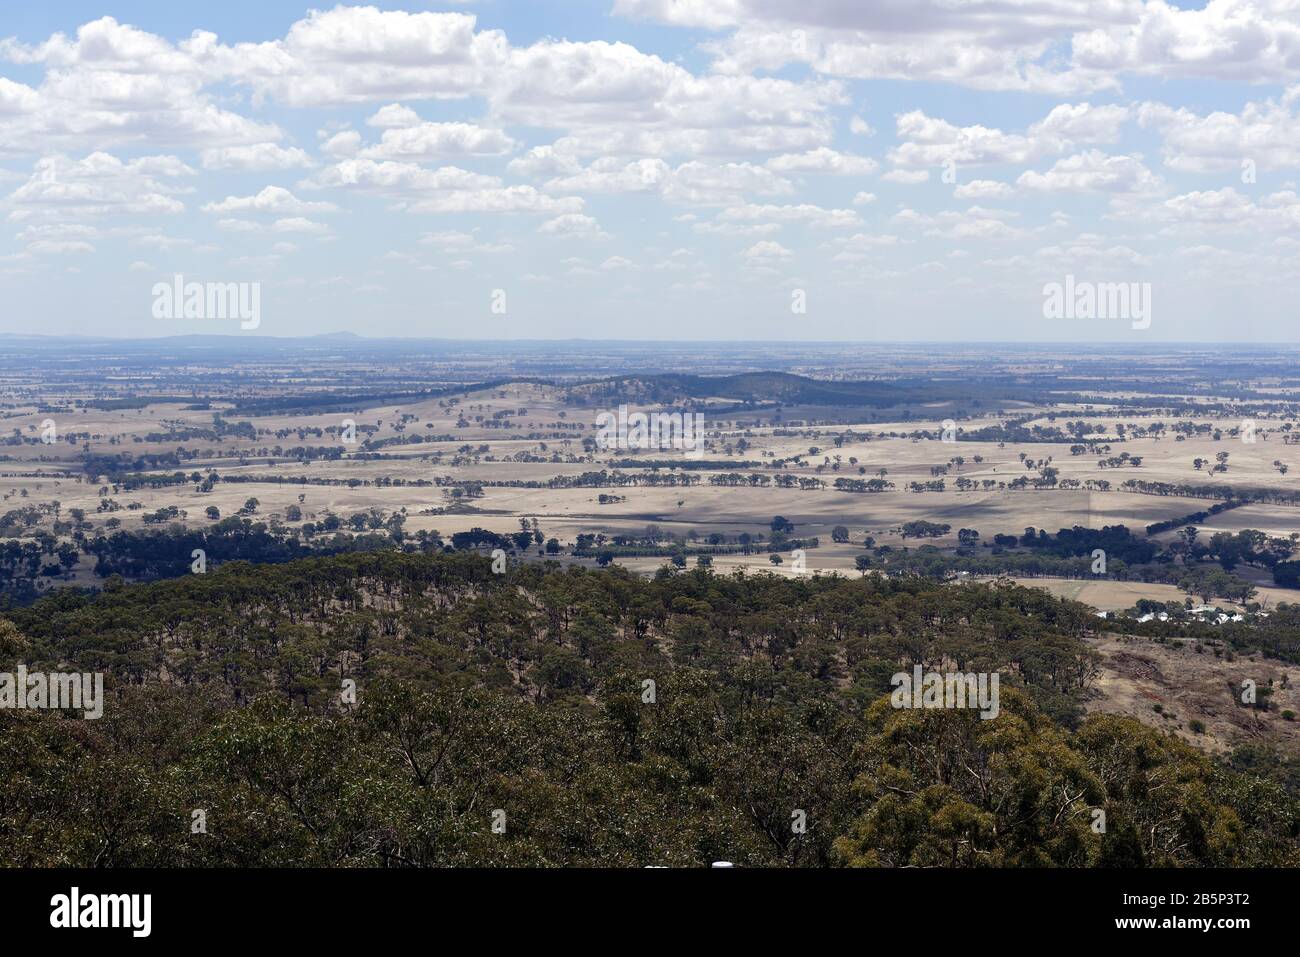 Panoramic view of the countryside from the Mount Tarrengower lookout tower, Maldon, Victoria, Australia. The tower was opened in 1924 and sits on the Stock Photo